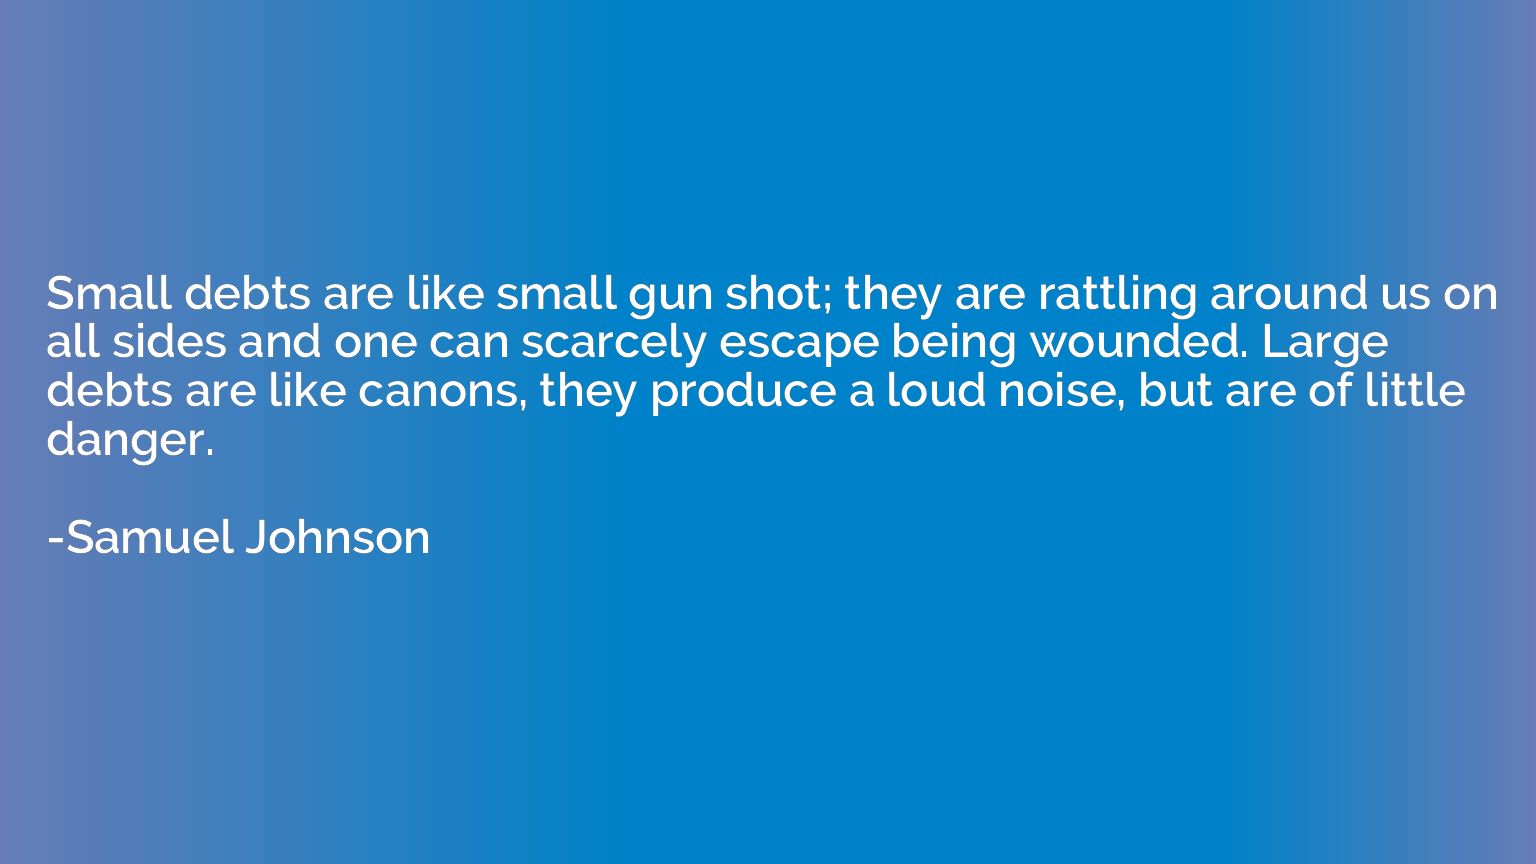 Small debts are like small gun shot; they are rattling aroun